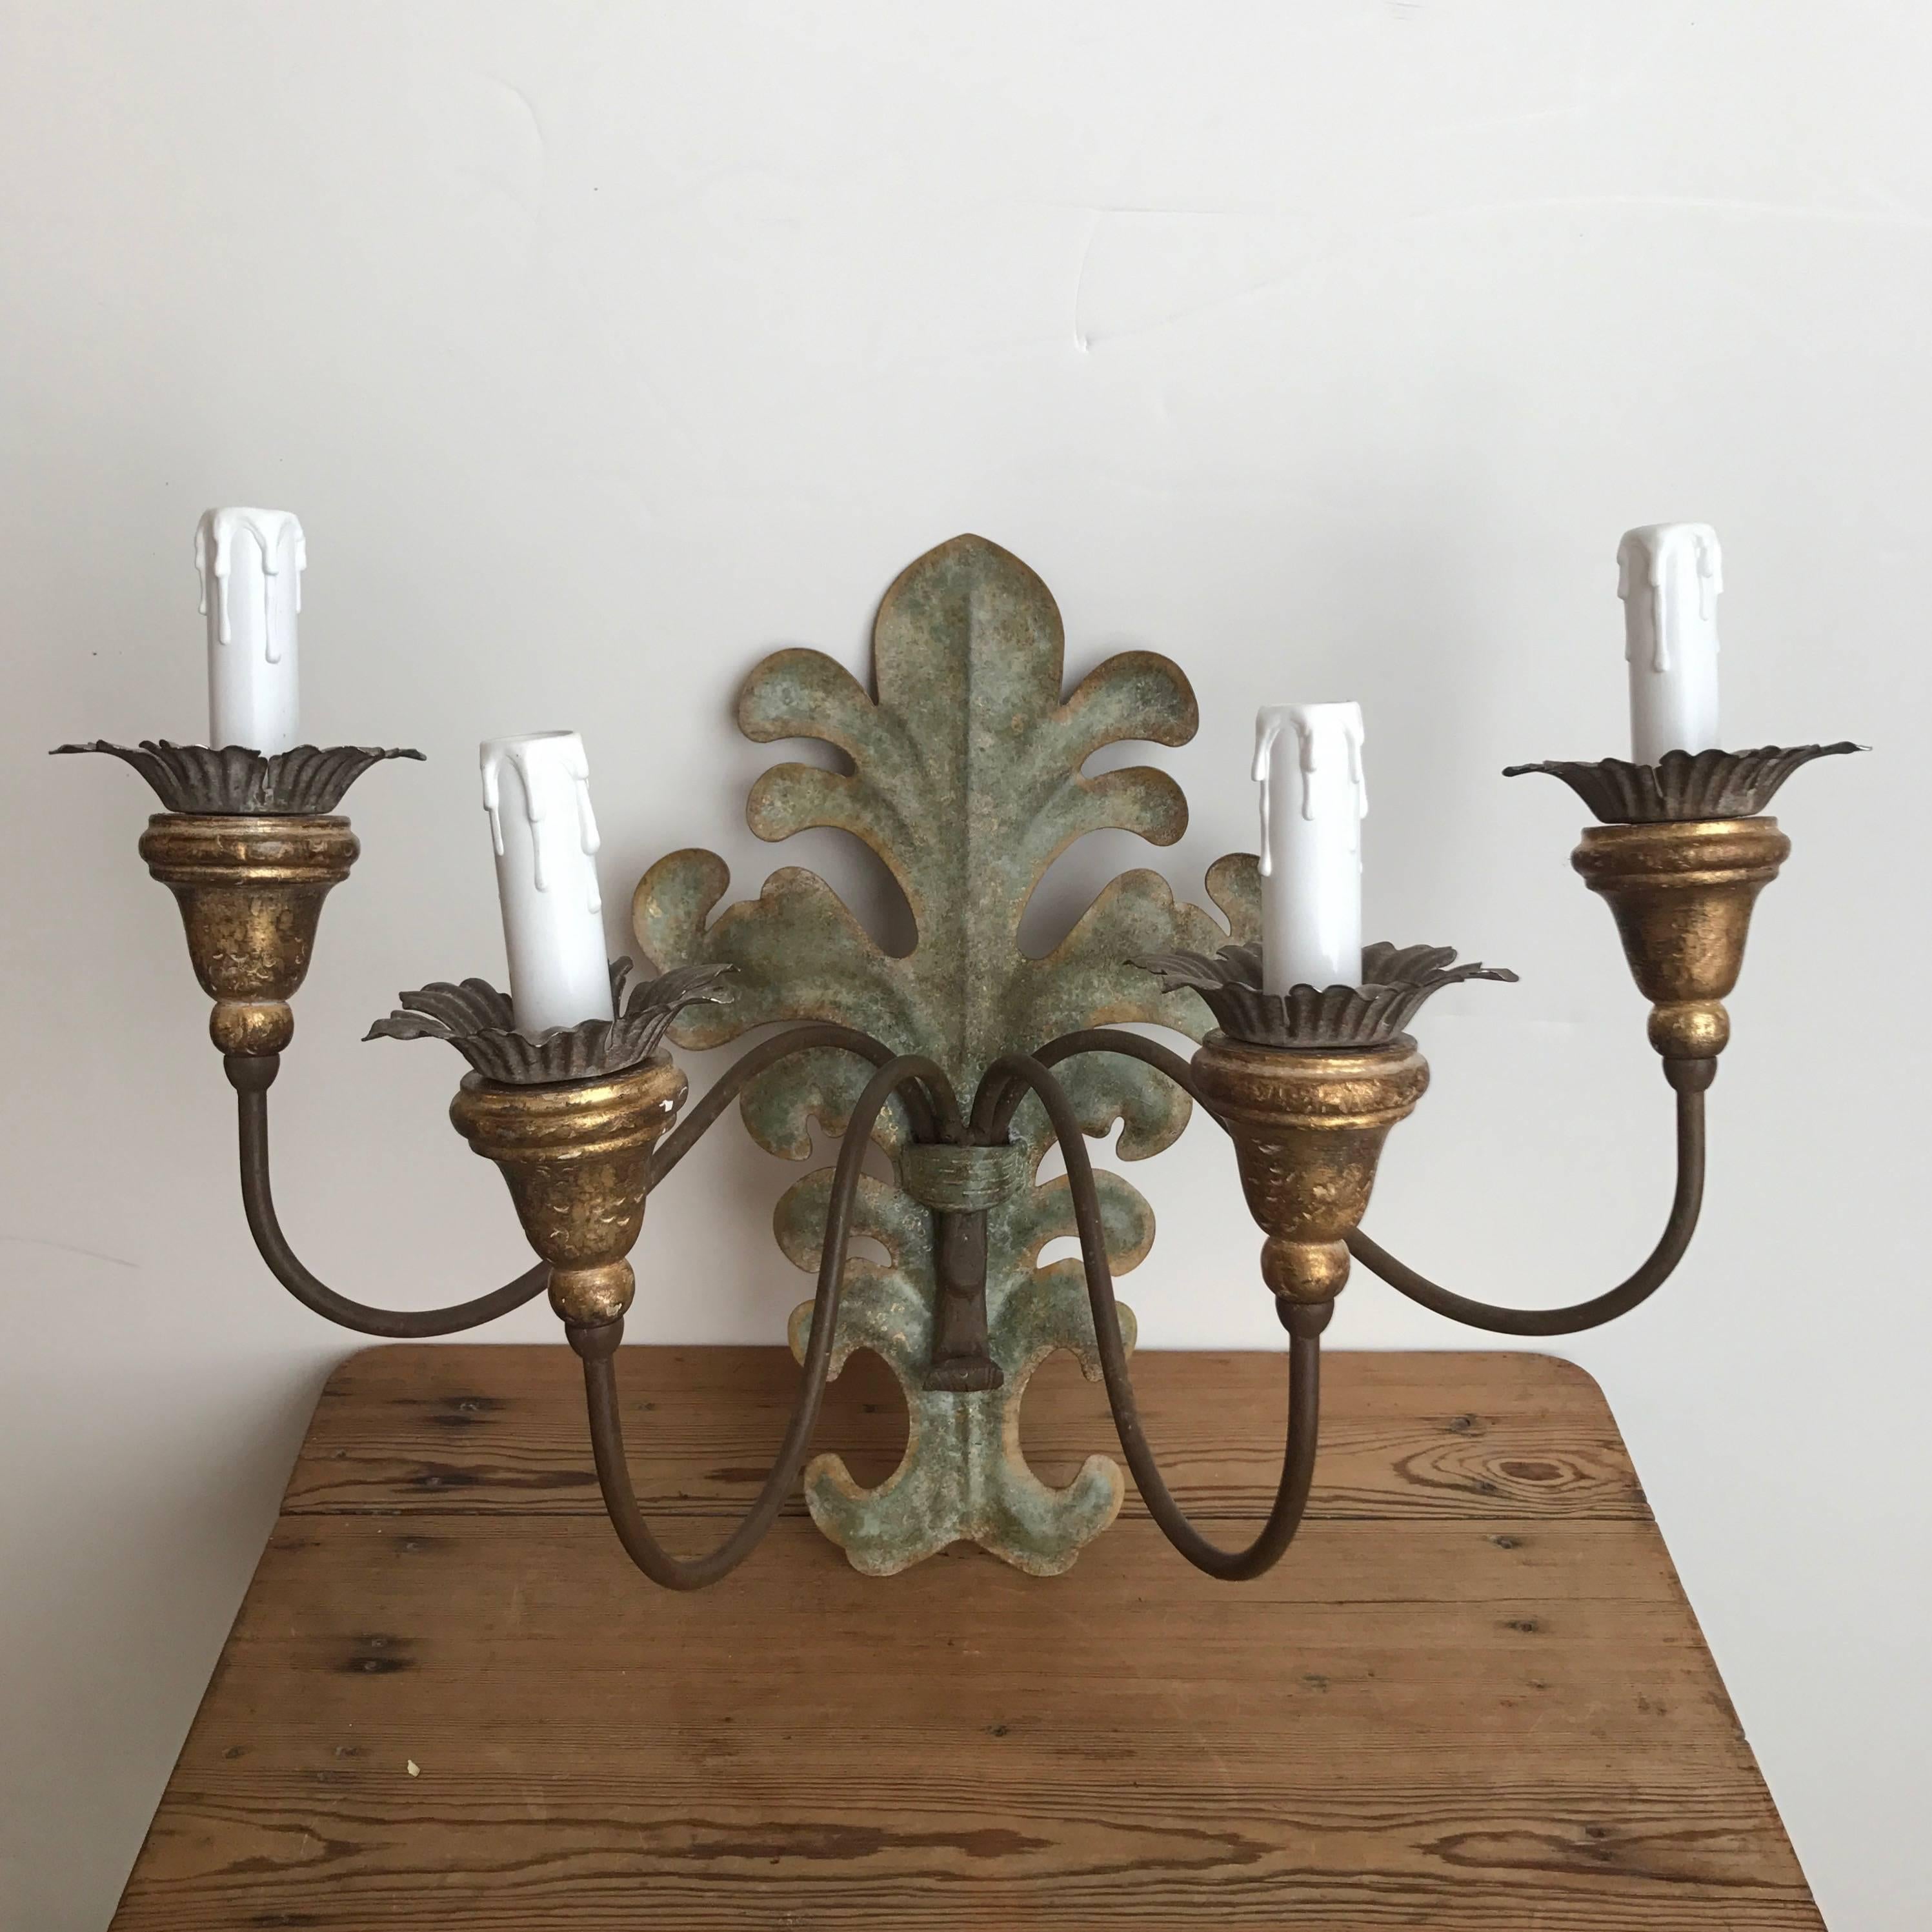 Pair of French 4-arm wood and tole sconces with decorative backplates. USA wired.